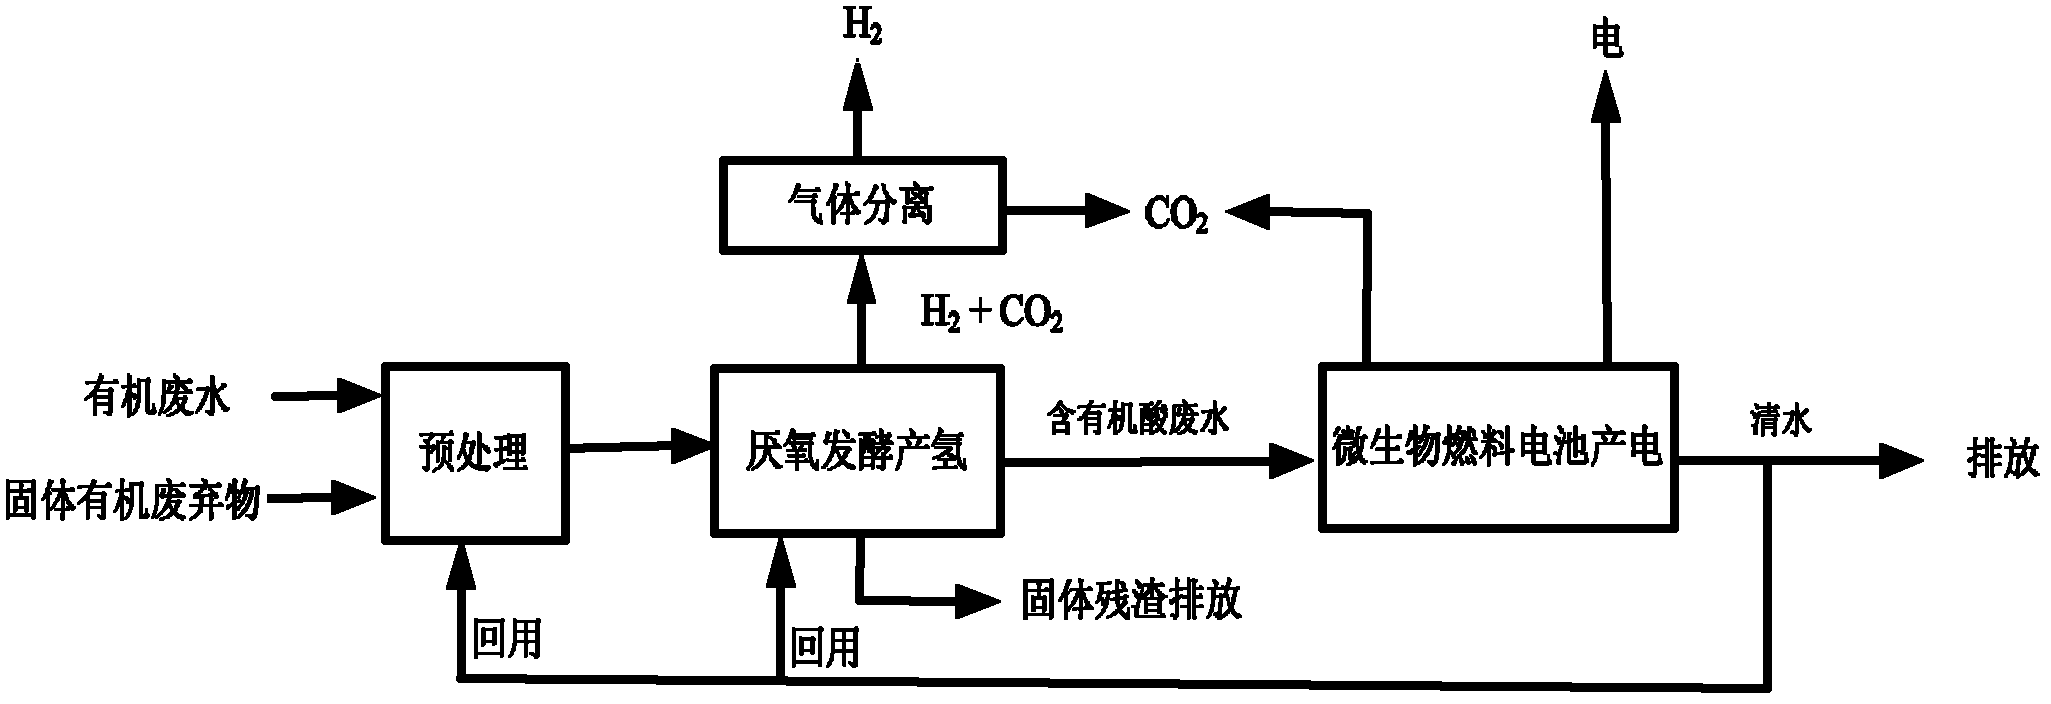 A method and device for co-producing hydrogen and electricity from organic waste